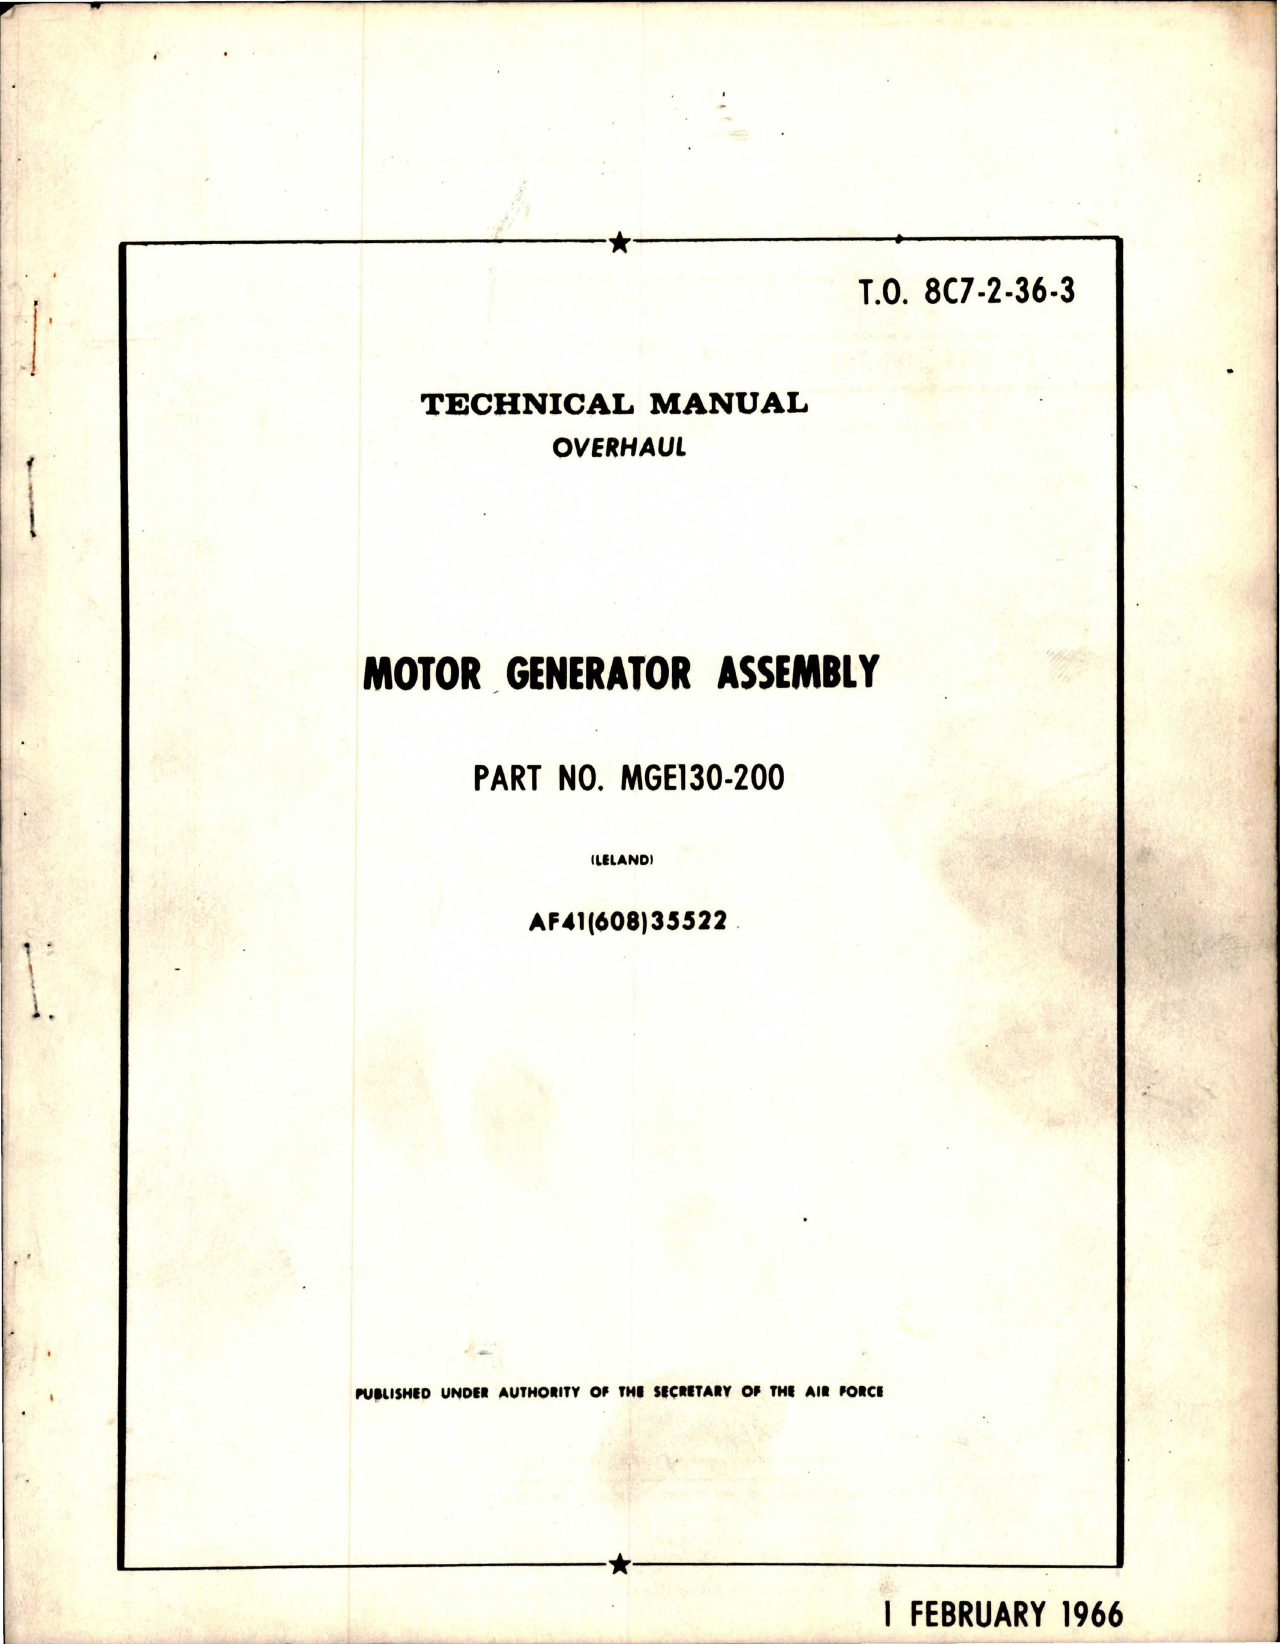 Sample page 1 from AirCorps Library document: Overhaul Manual for Motor Generator Assembly - Part MGE130-200 